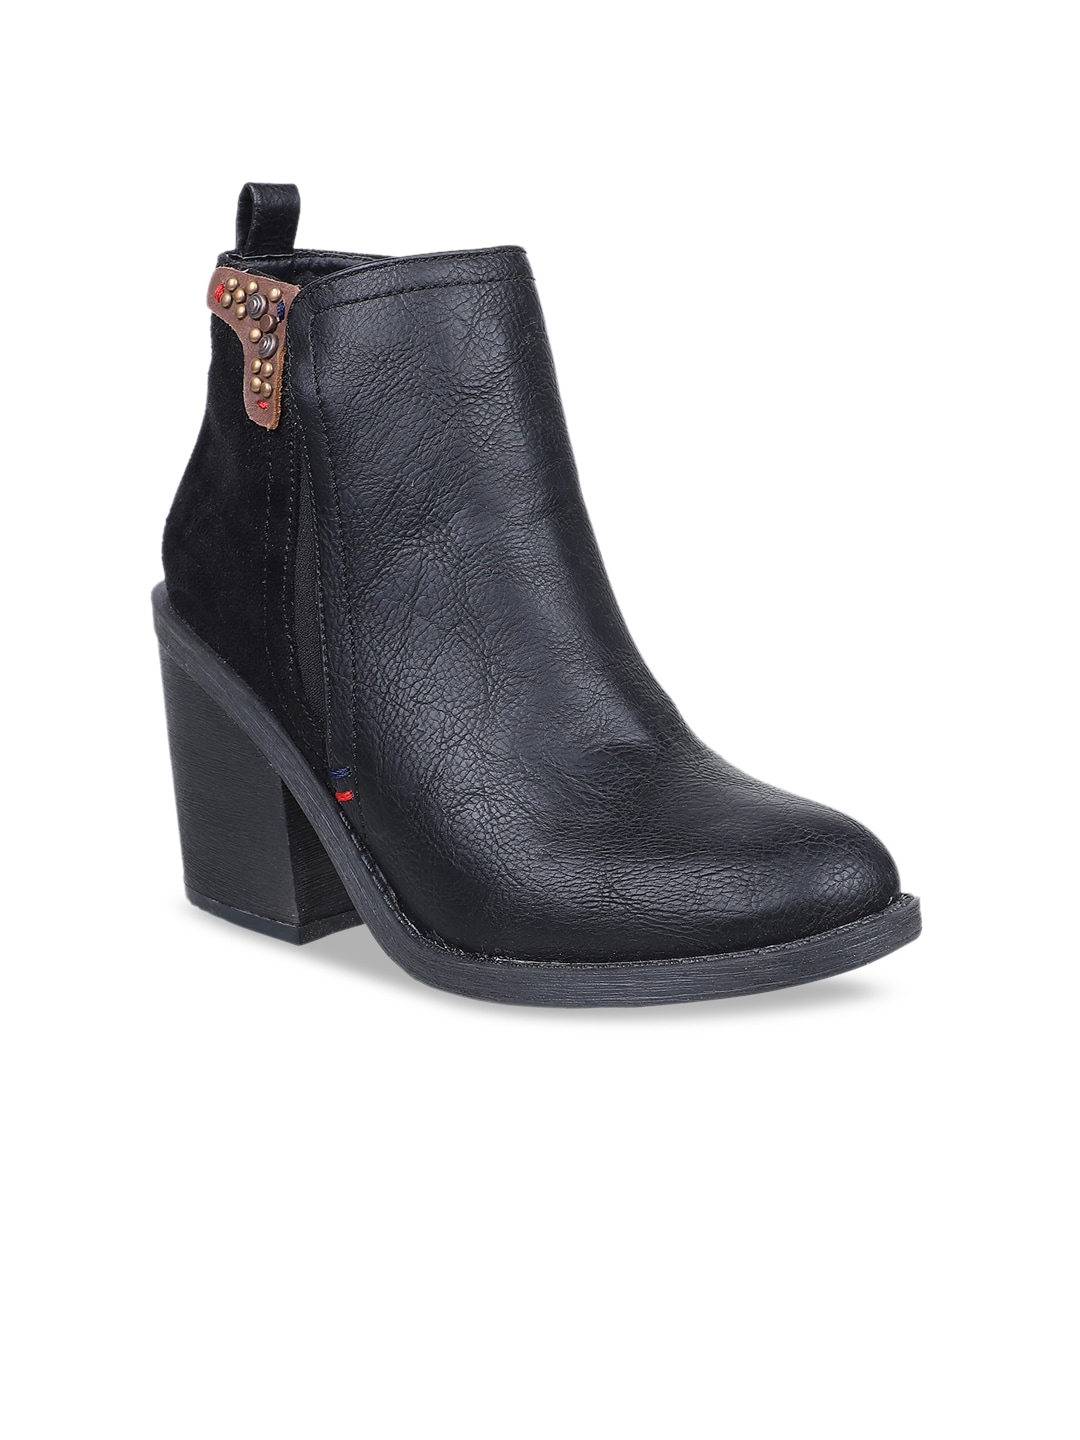 ELLE Women Black Solid Heeled Boots Price in India